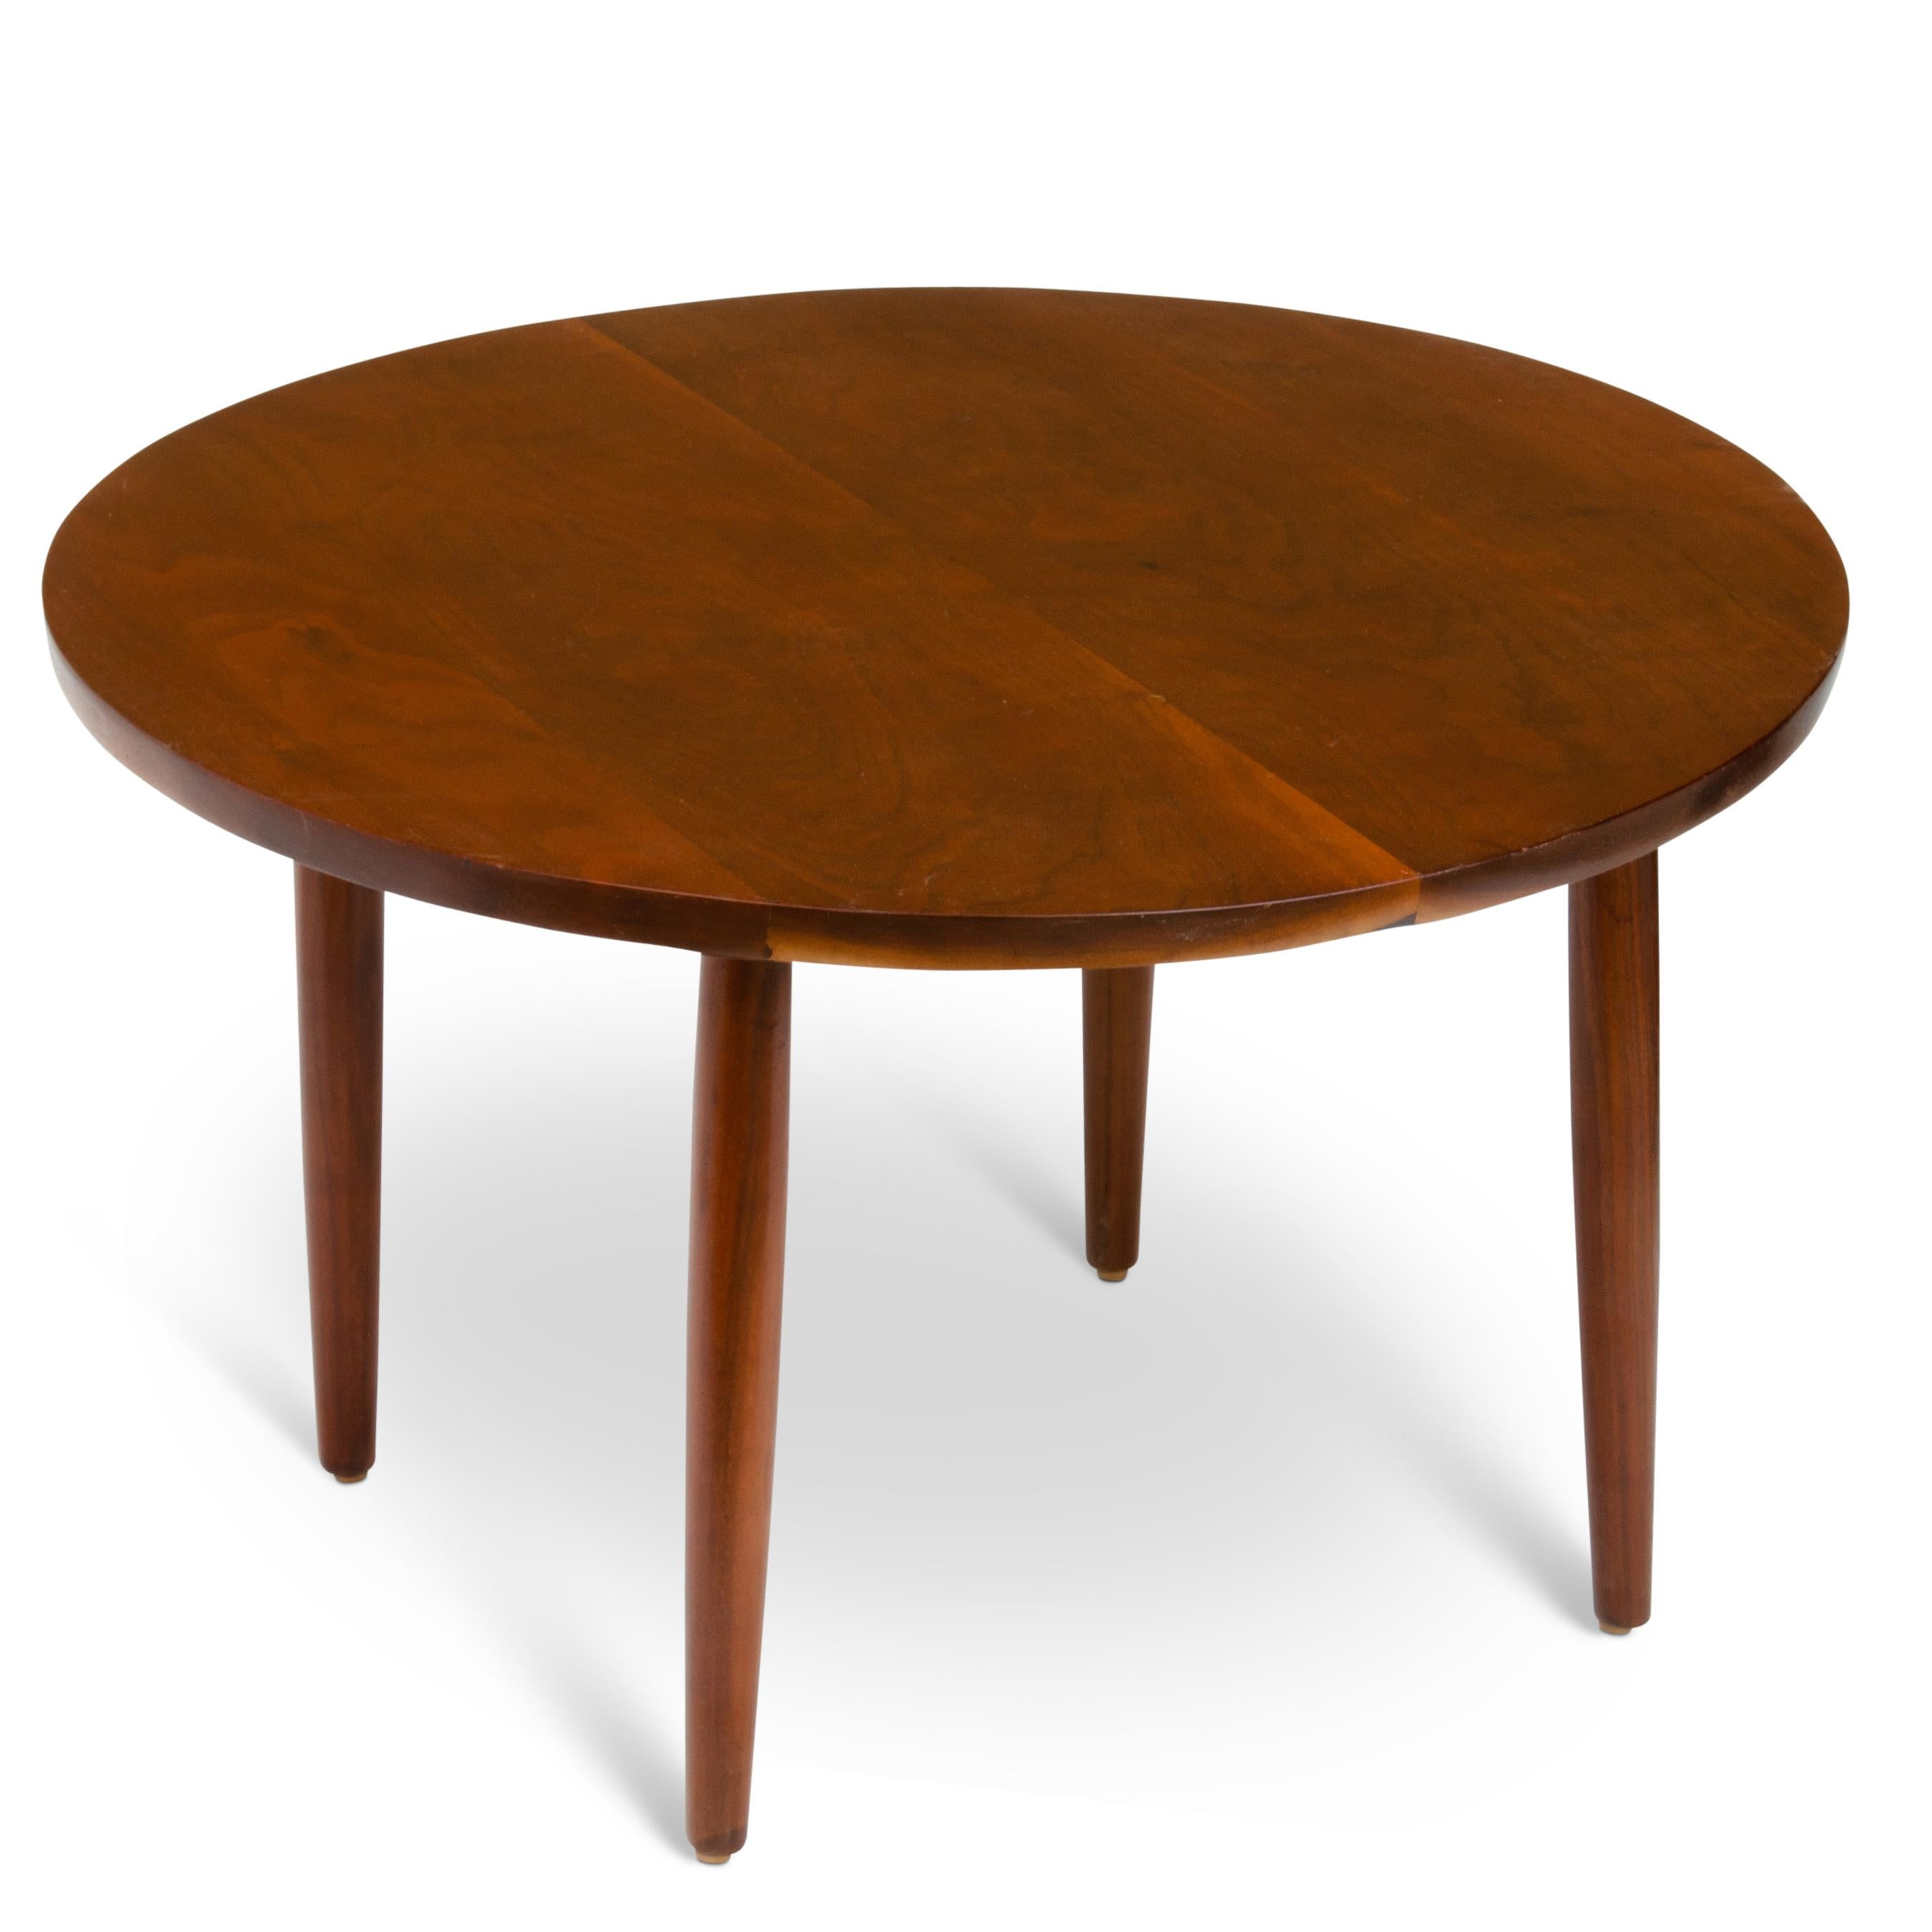 Cesare Occhi Walnut Coffee Table George Nakashima Bucks County Studio Woodworker In Good Condition For Sale In Forest Grove, PA